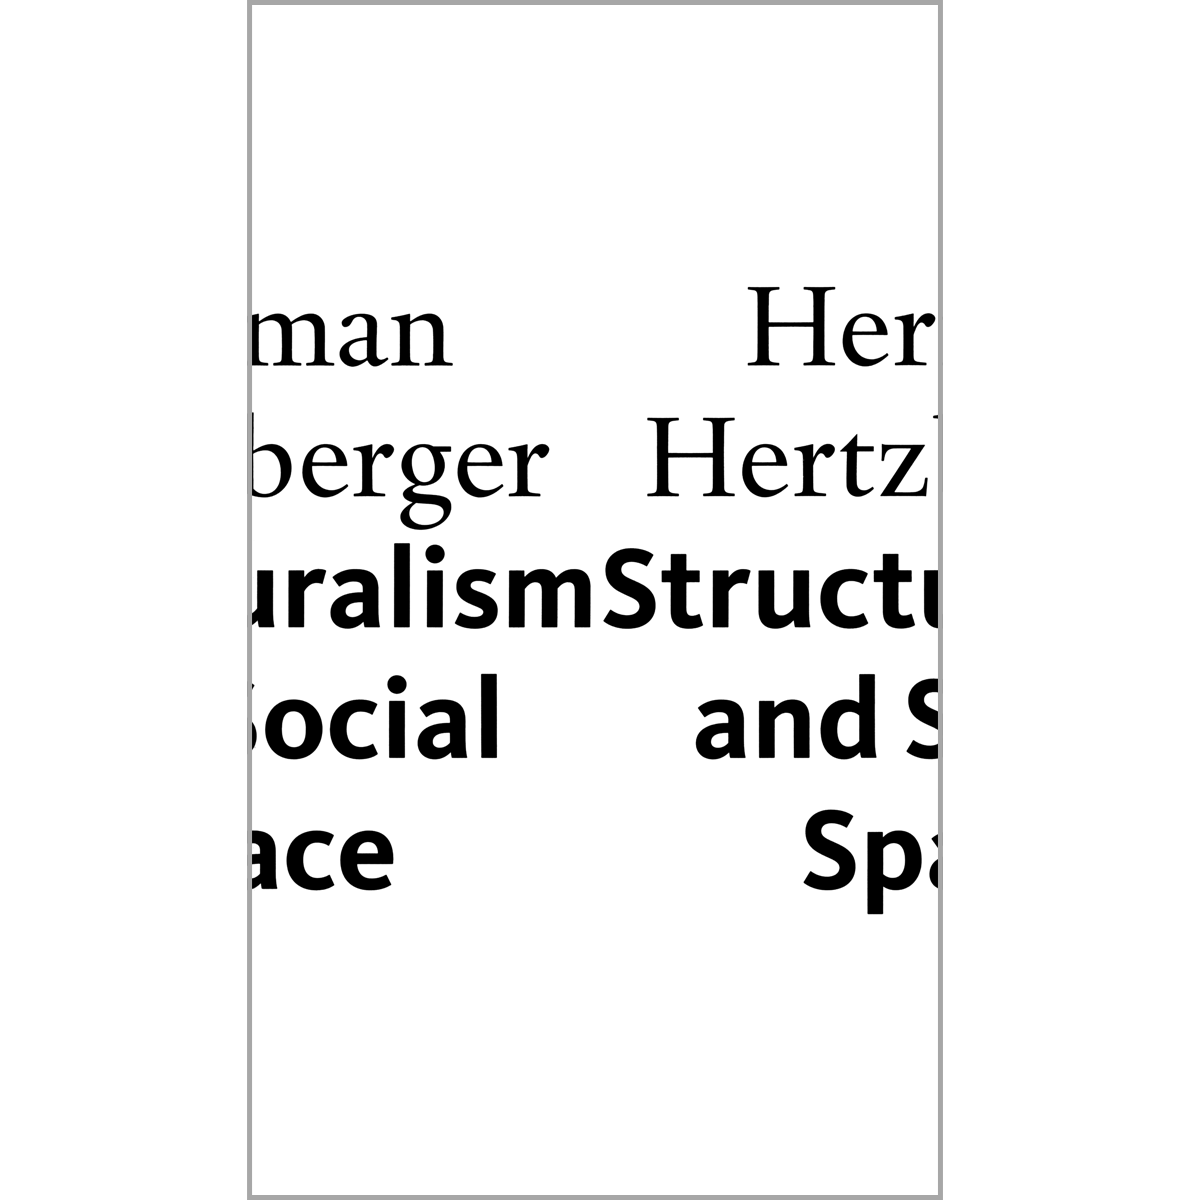 Structuralism and Social Space